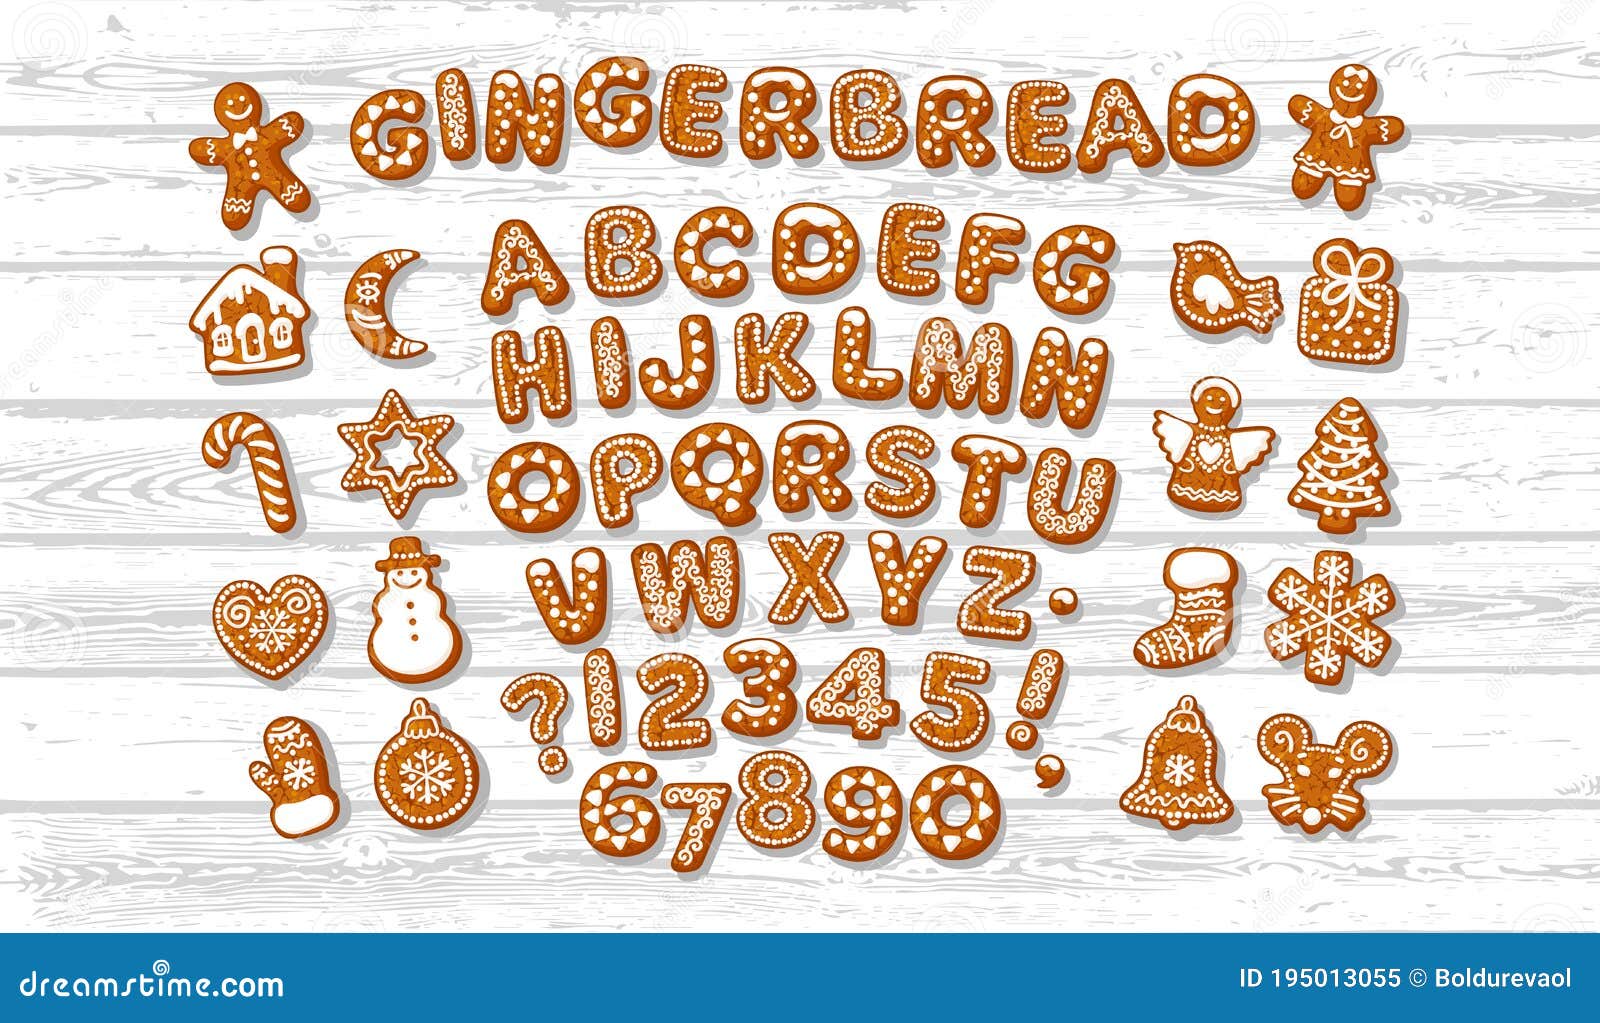 christmas and new year gingerbread alphabet letters and numbers and cute traditional holiday cookies